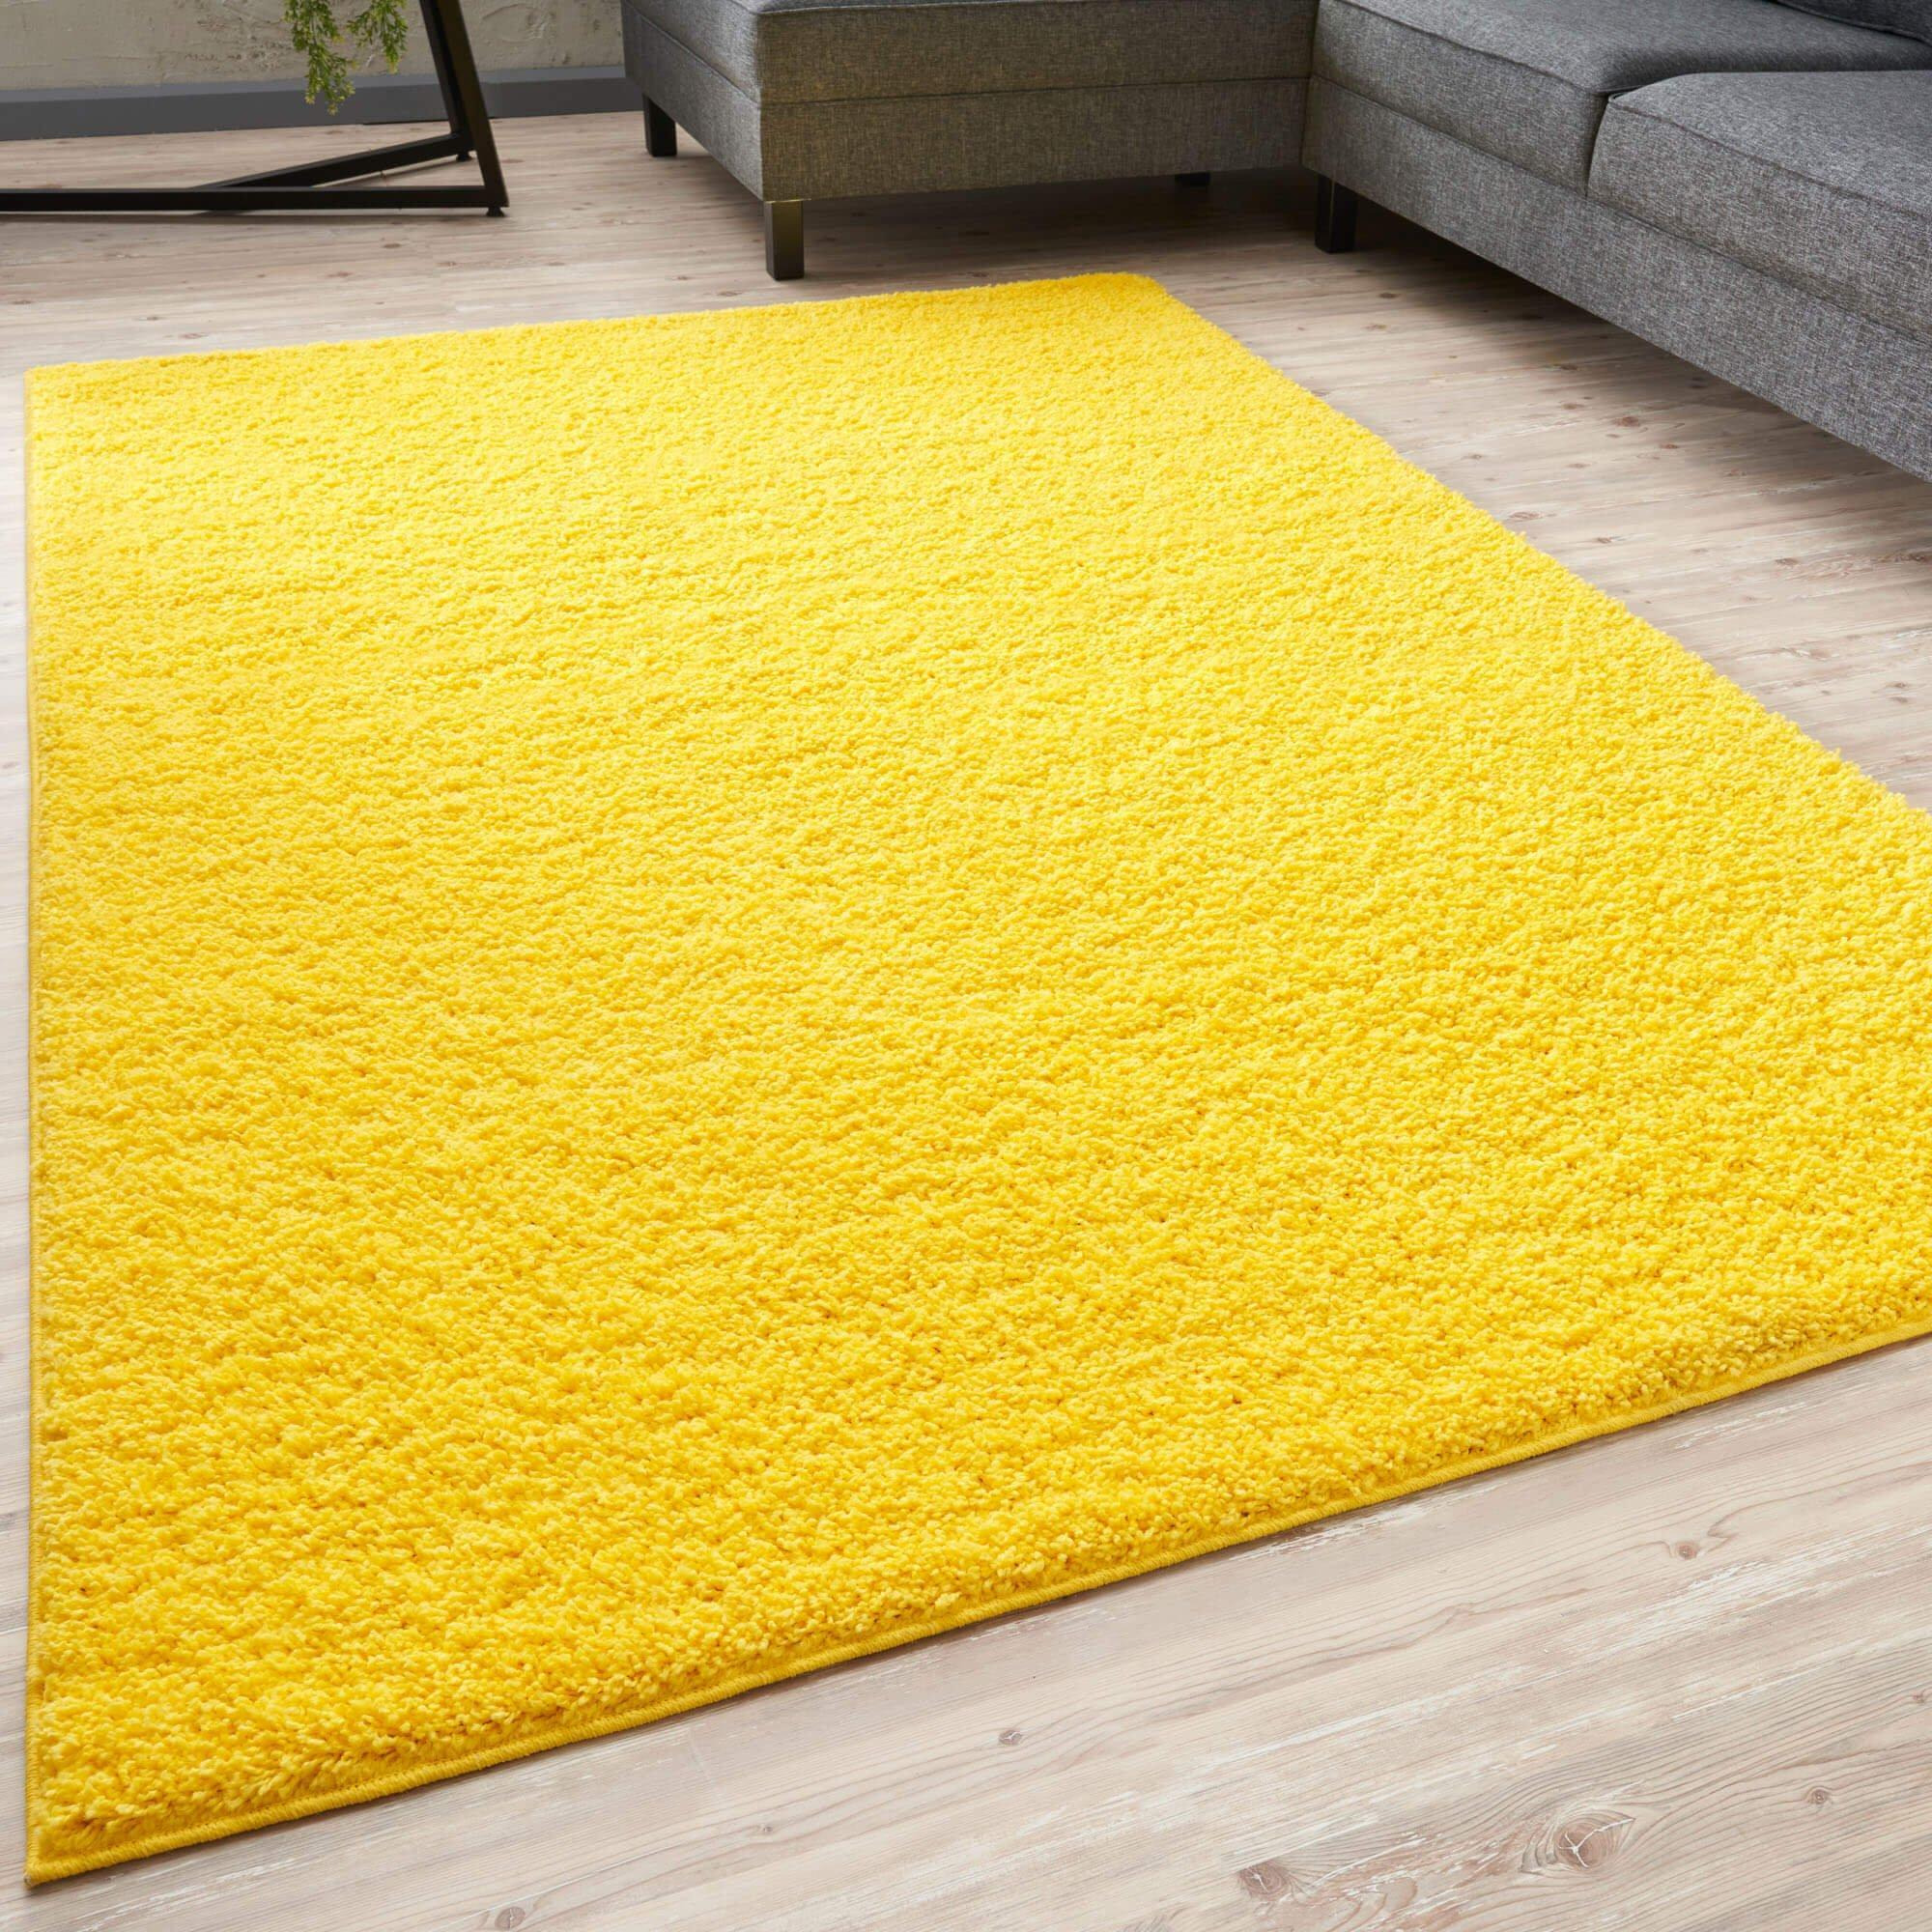 Myshaggy Collection Rugs Solid Design in Yellow - image 1